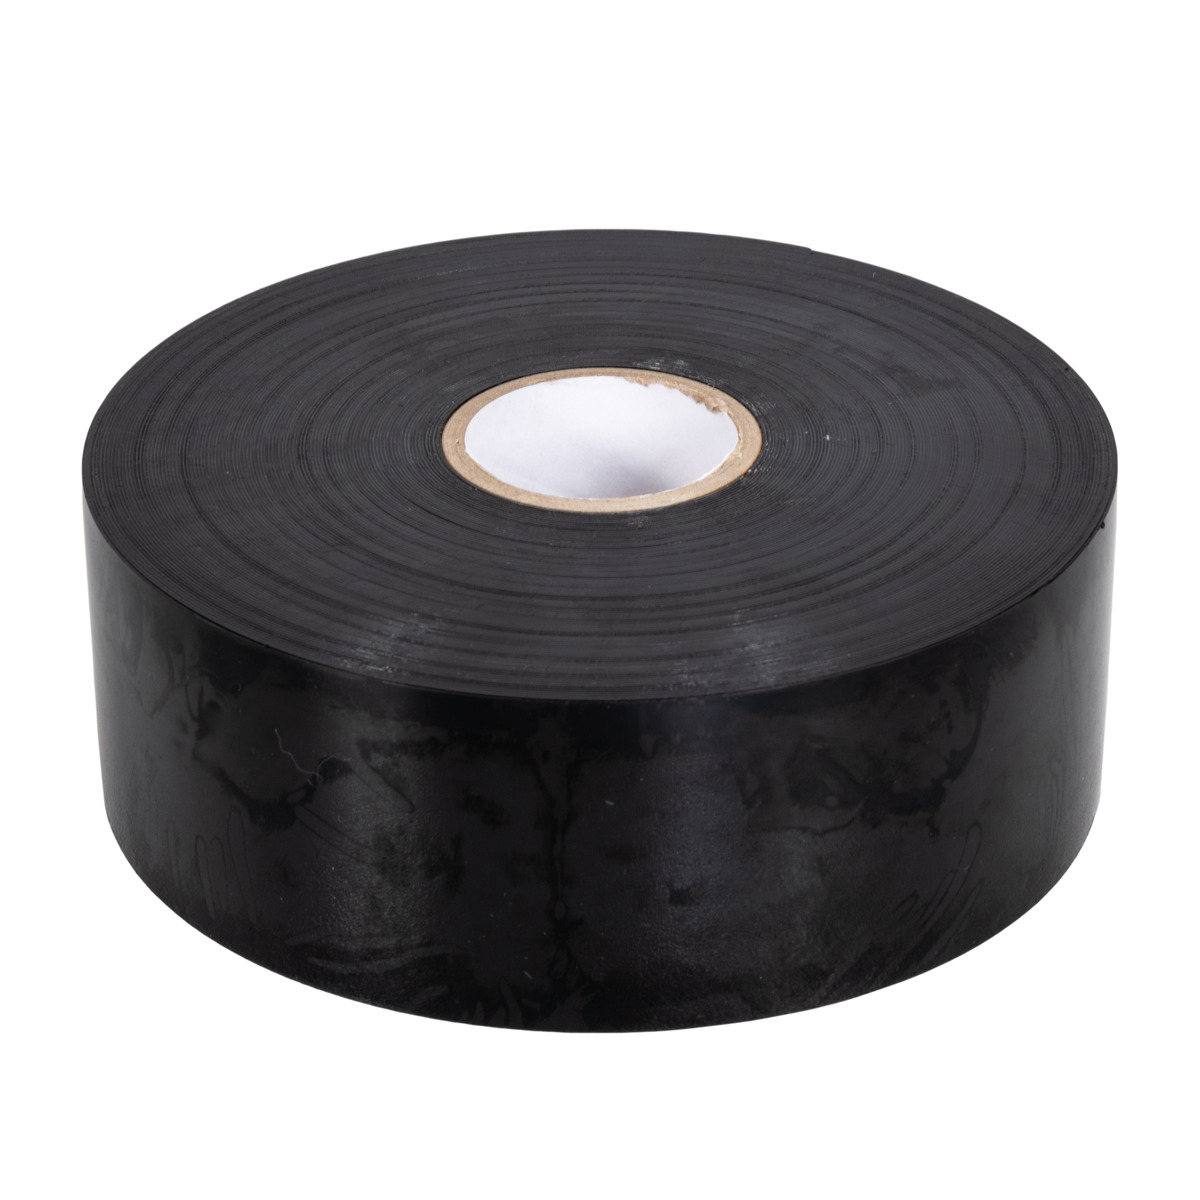 Heat Resistant Tape 10mm by 30m – LAWSON SUPPLY